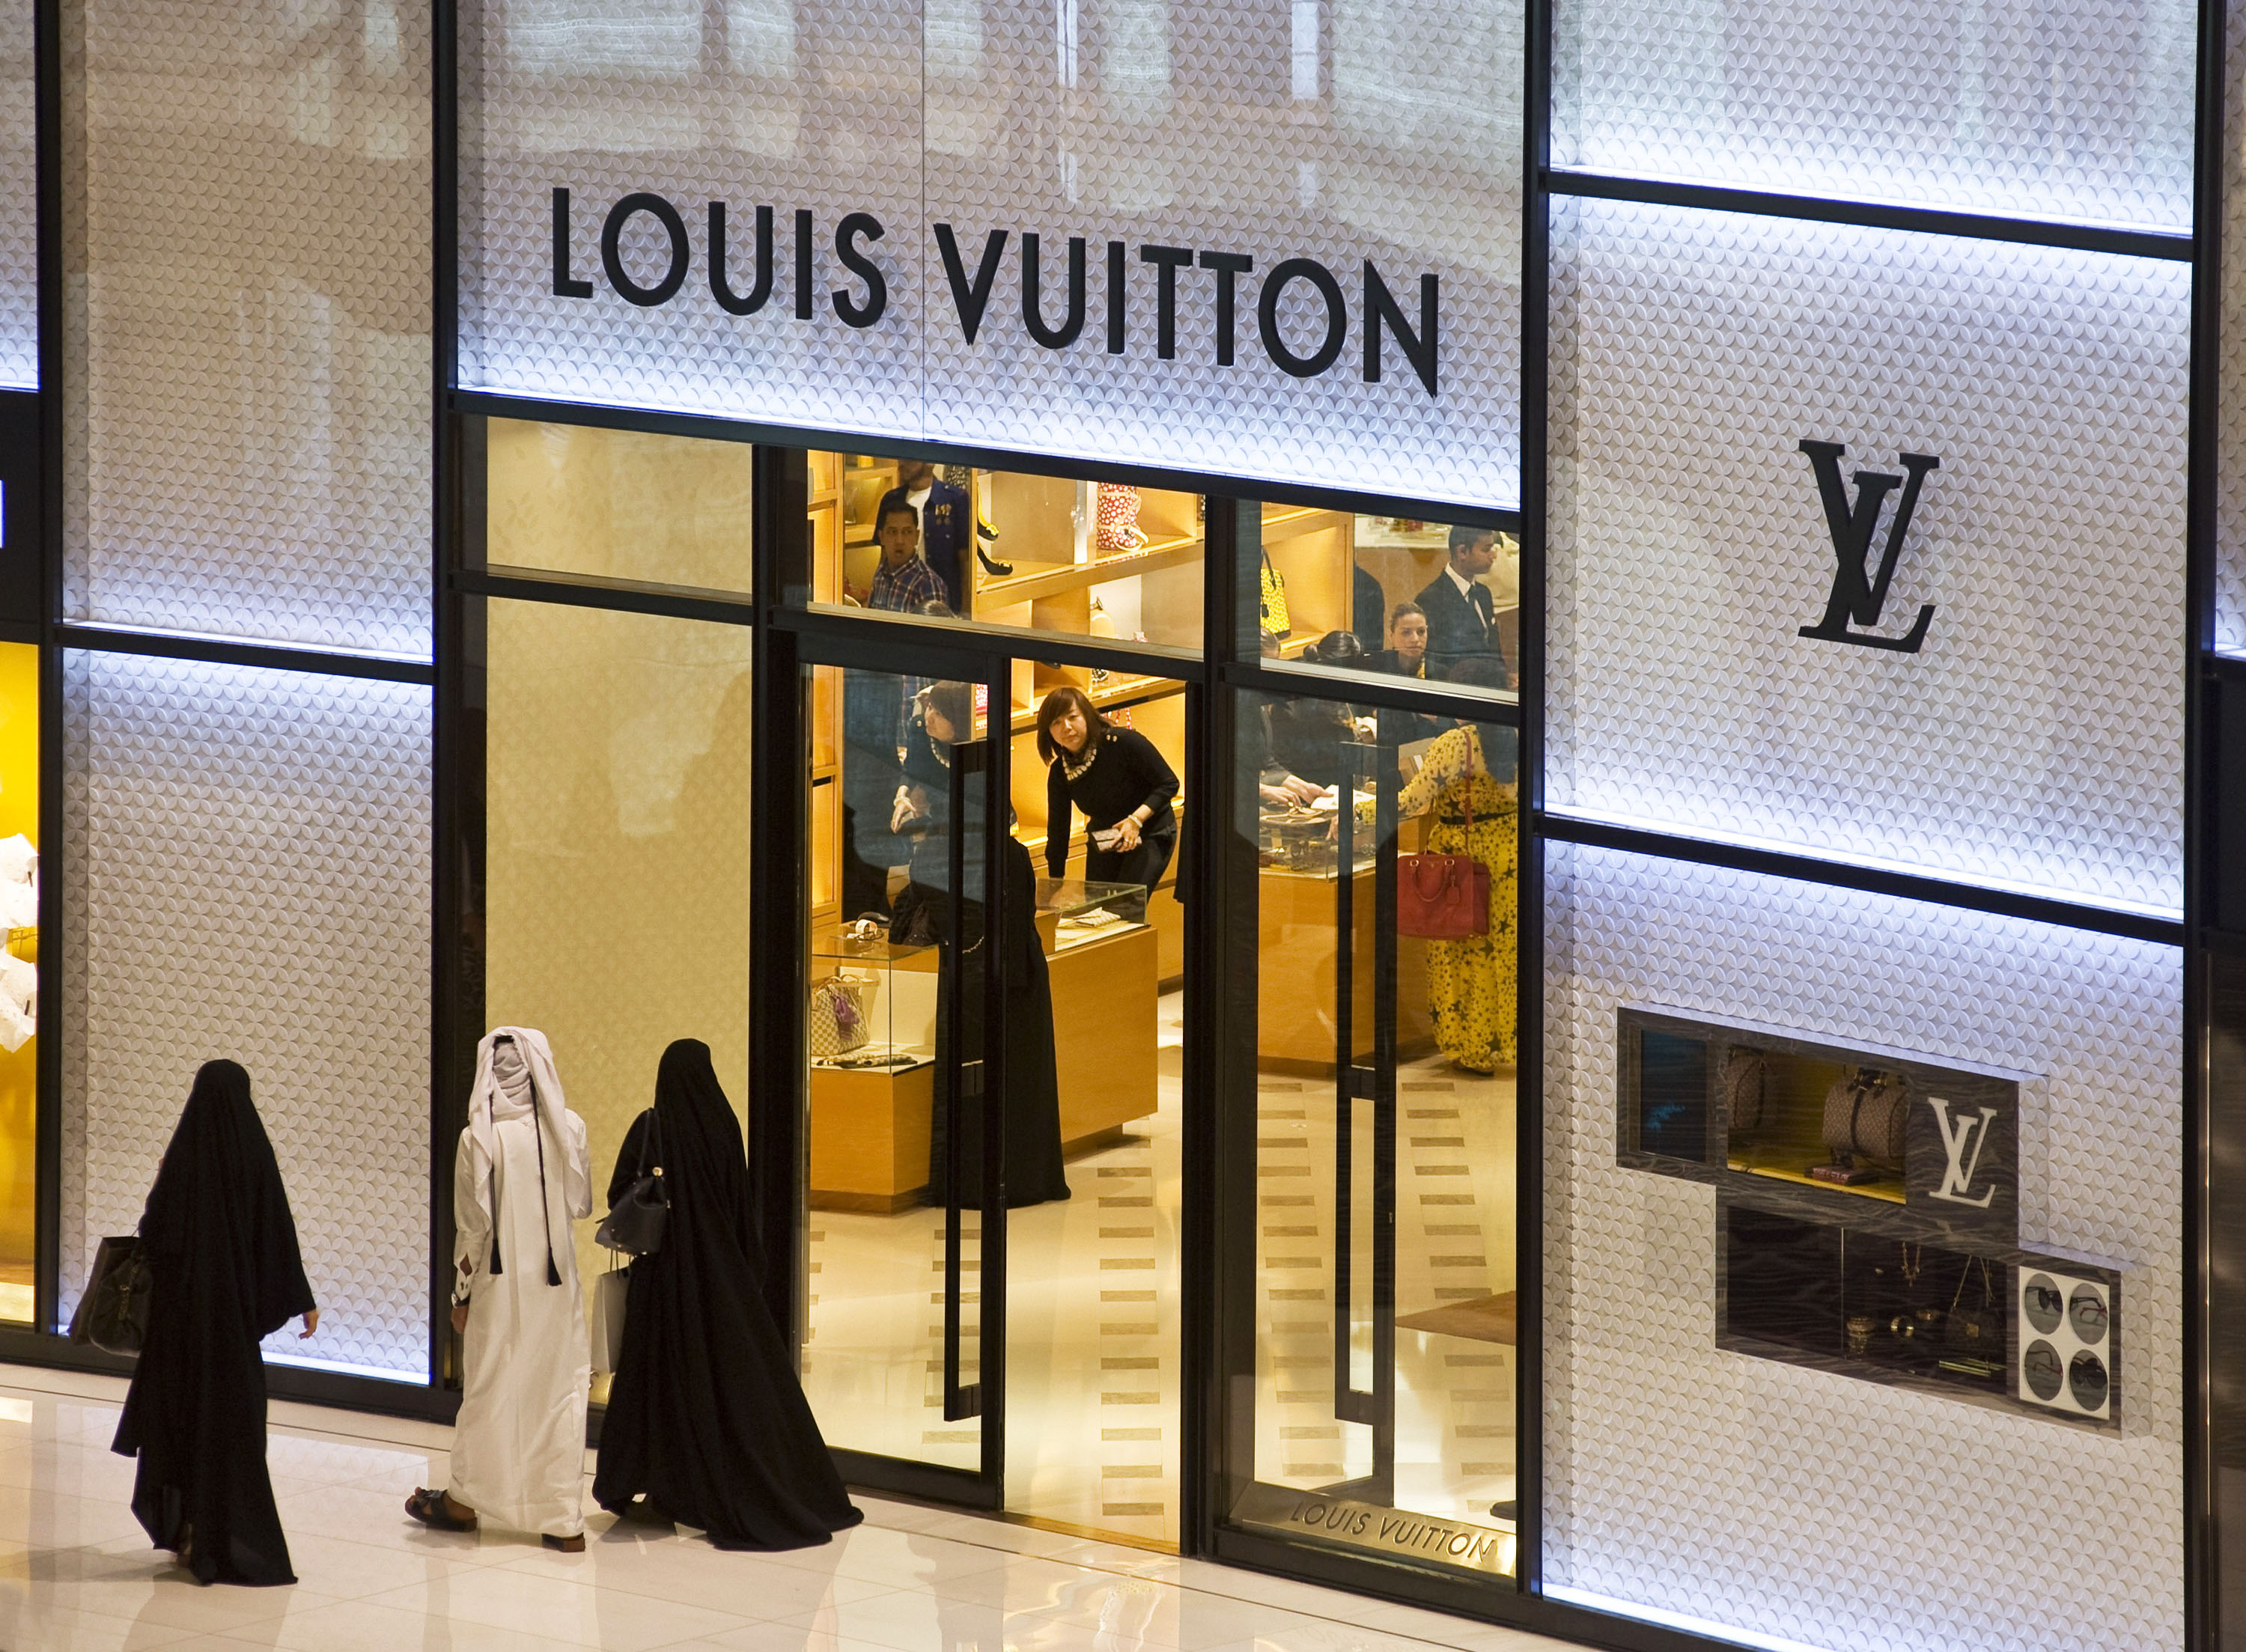 Bernard Arnault, Founder of LVMH, Loses $11 B. After Stock Sellout